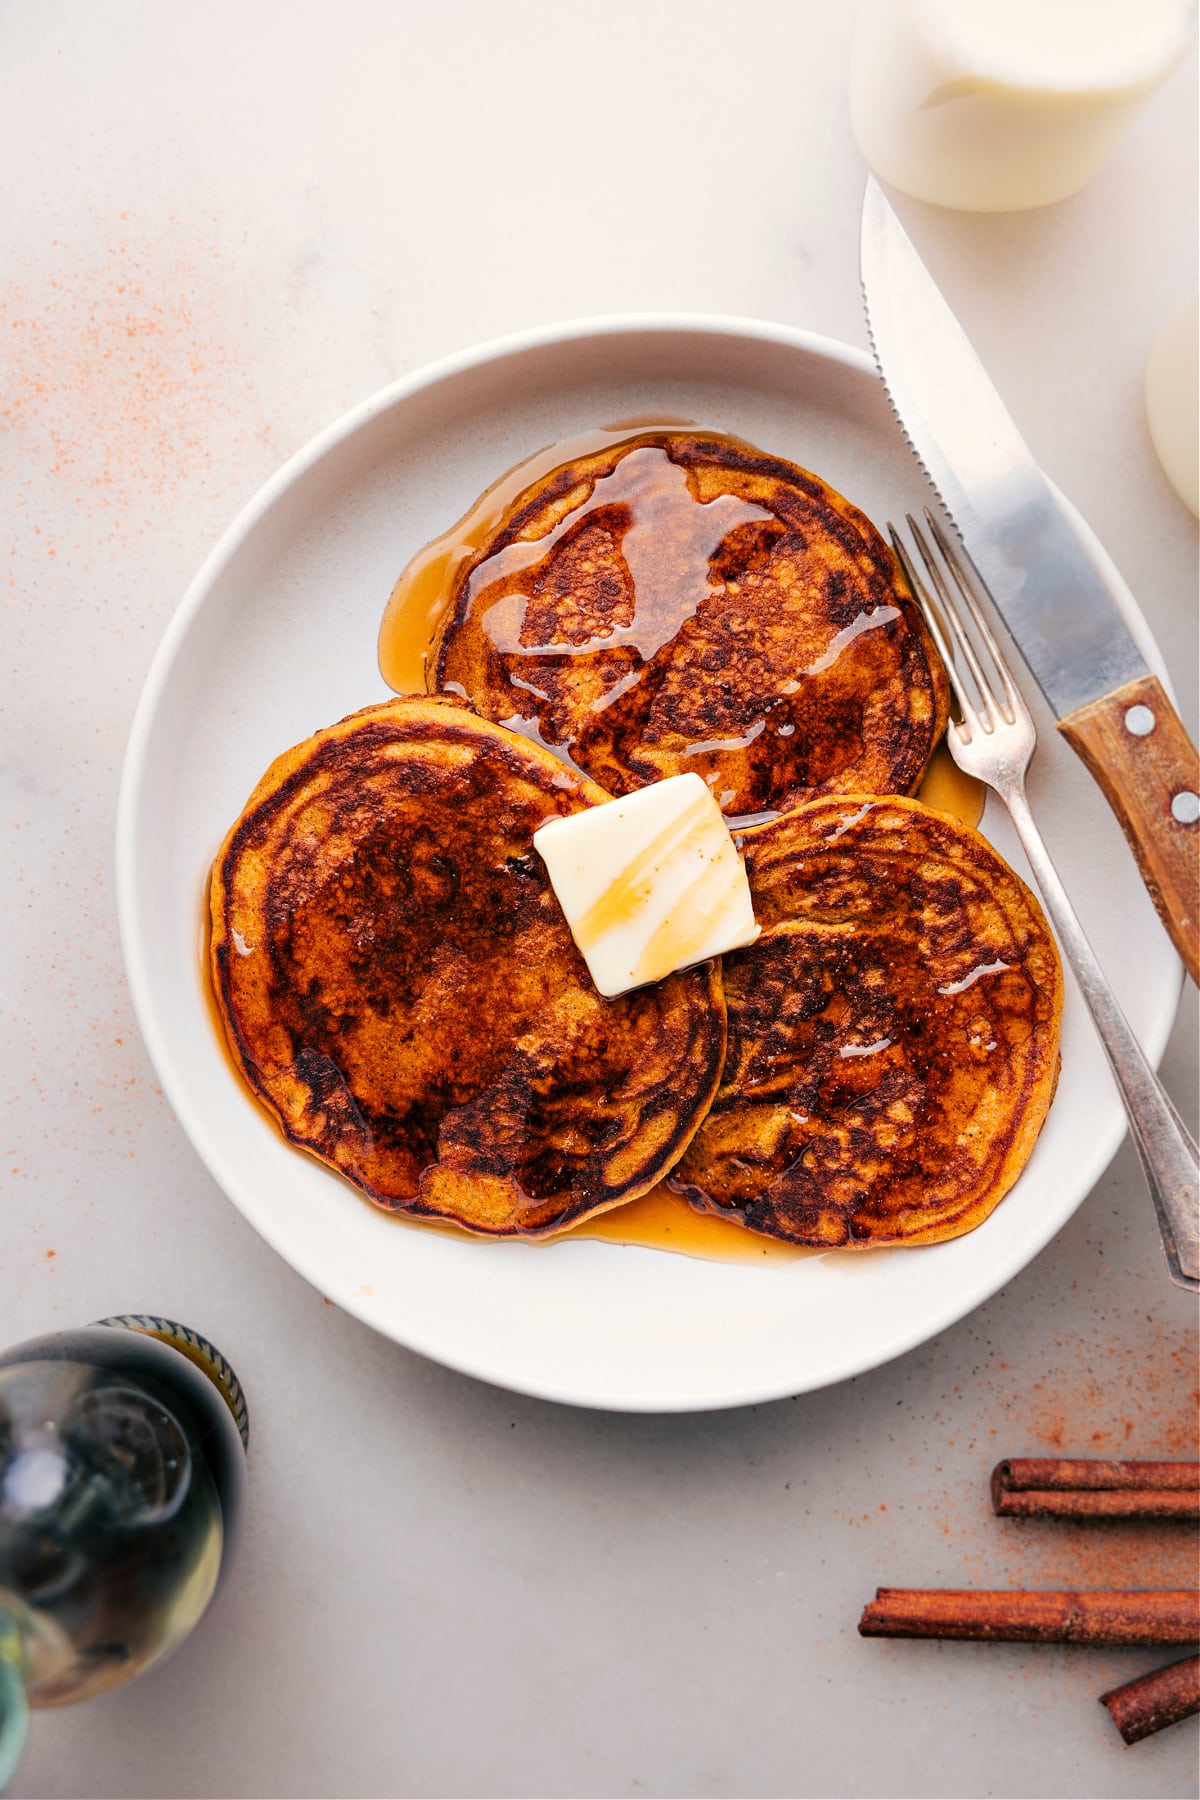 Plate of Three Pumpkin Pancakes Drizzled with Maple Syrup.